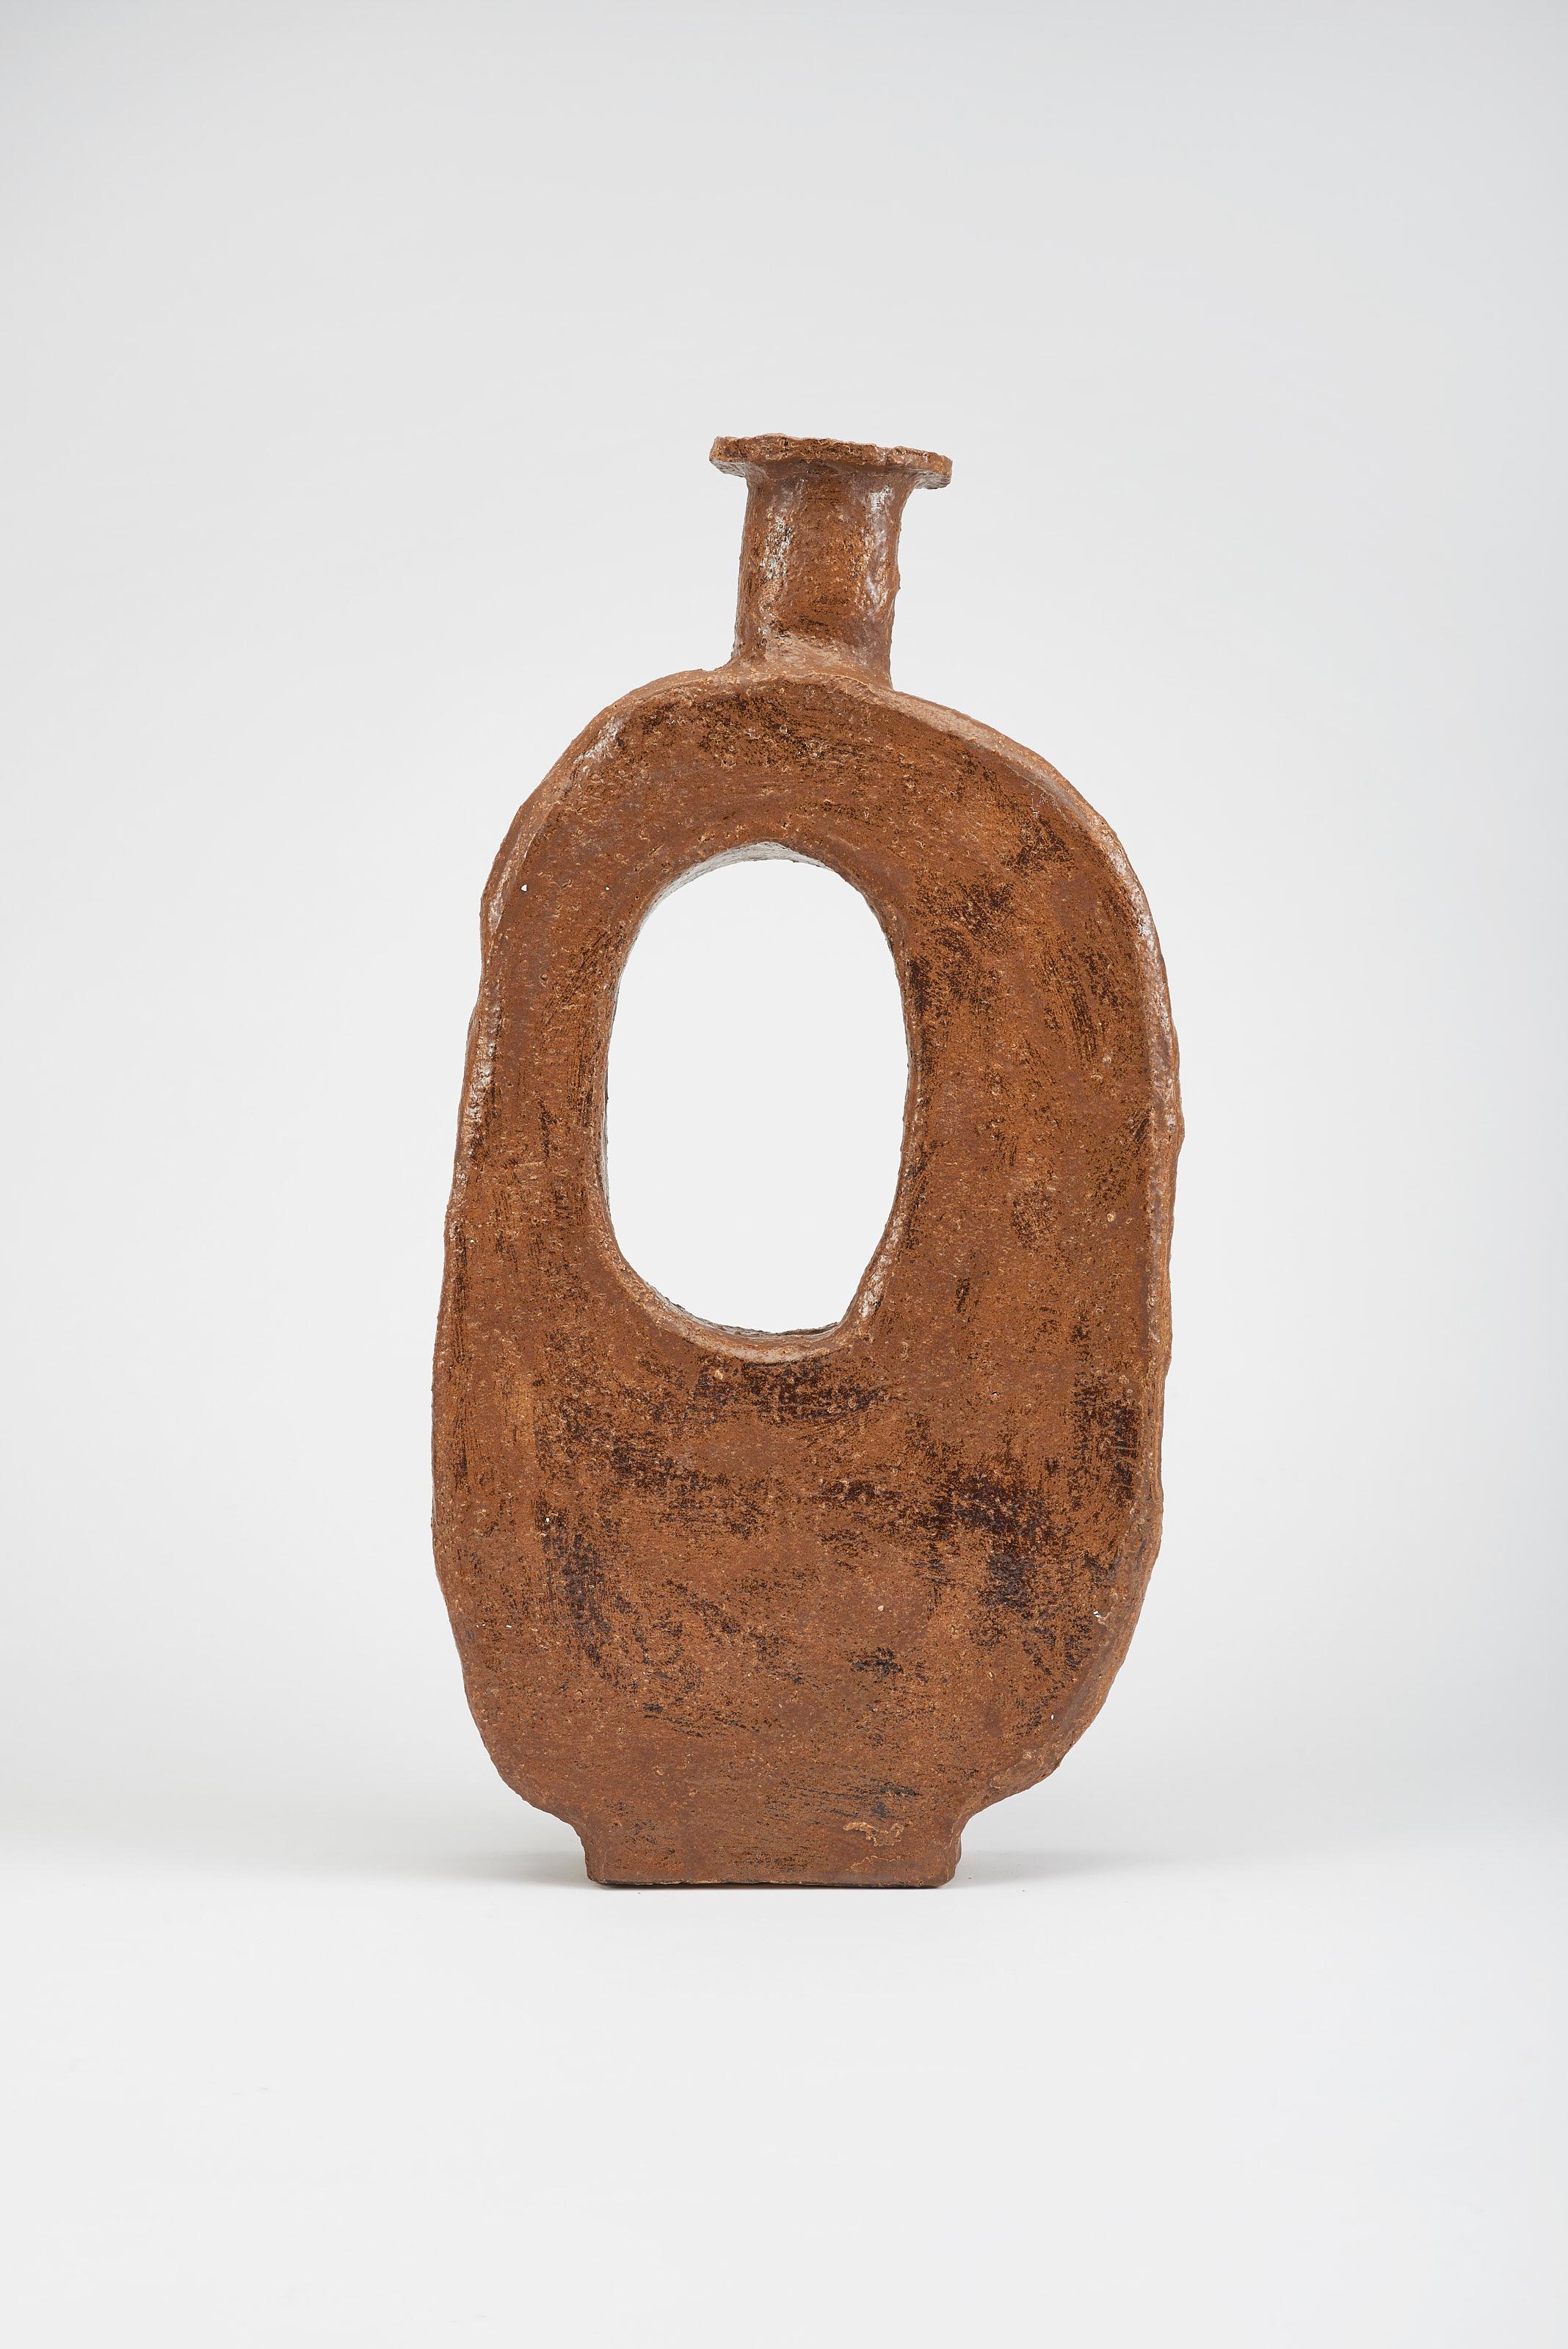 Taju Large Vase by Willem Van Hooff
Dimensions: W 42 x D 10 x H 63 cm (Dimensions may vary as pieces are hand-made and might present slight variations in sizes)
Material: Glazed Ceramics

Core is a serie of vessels. Inspired by prehistoric african